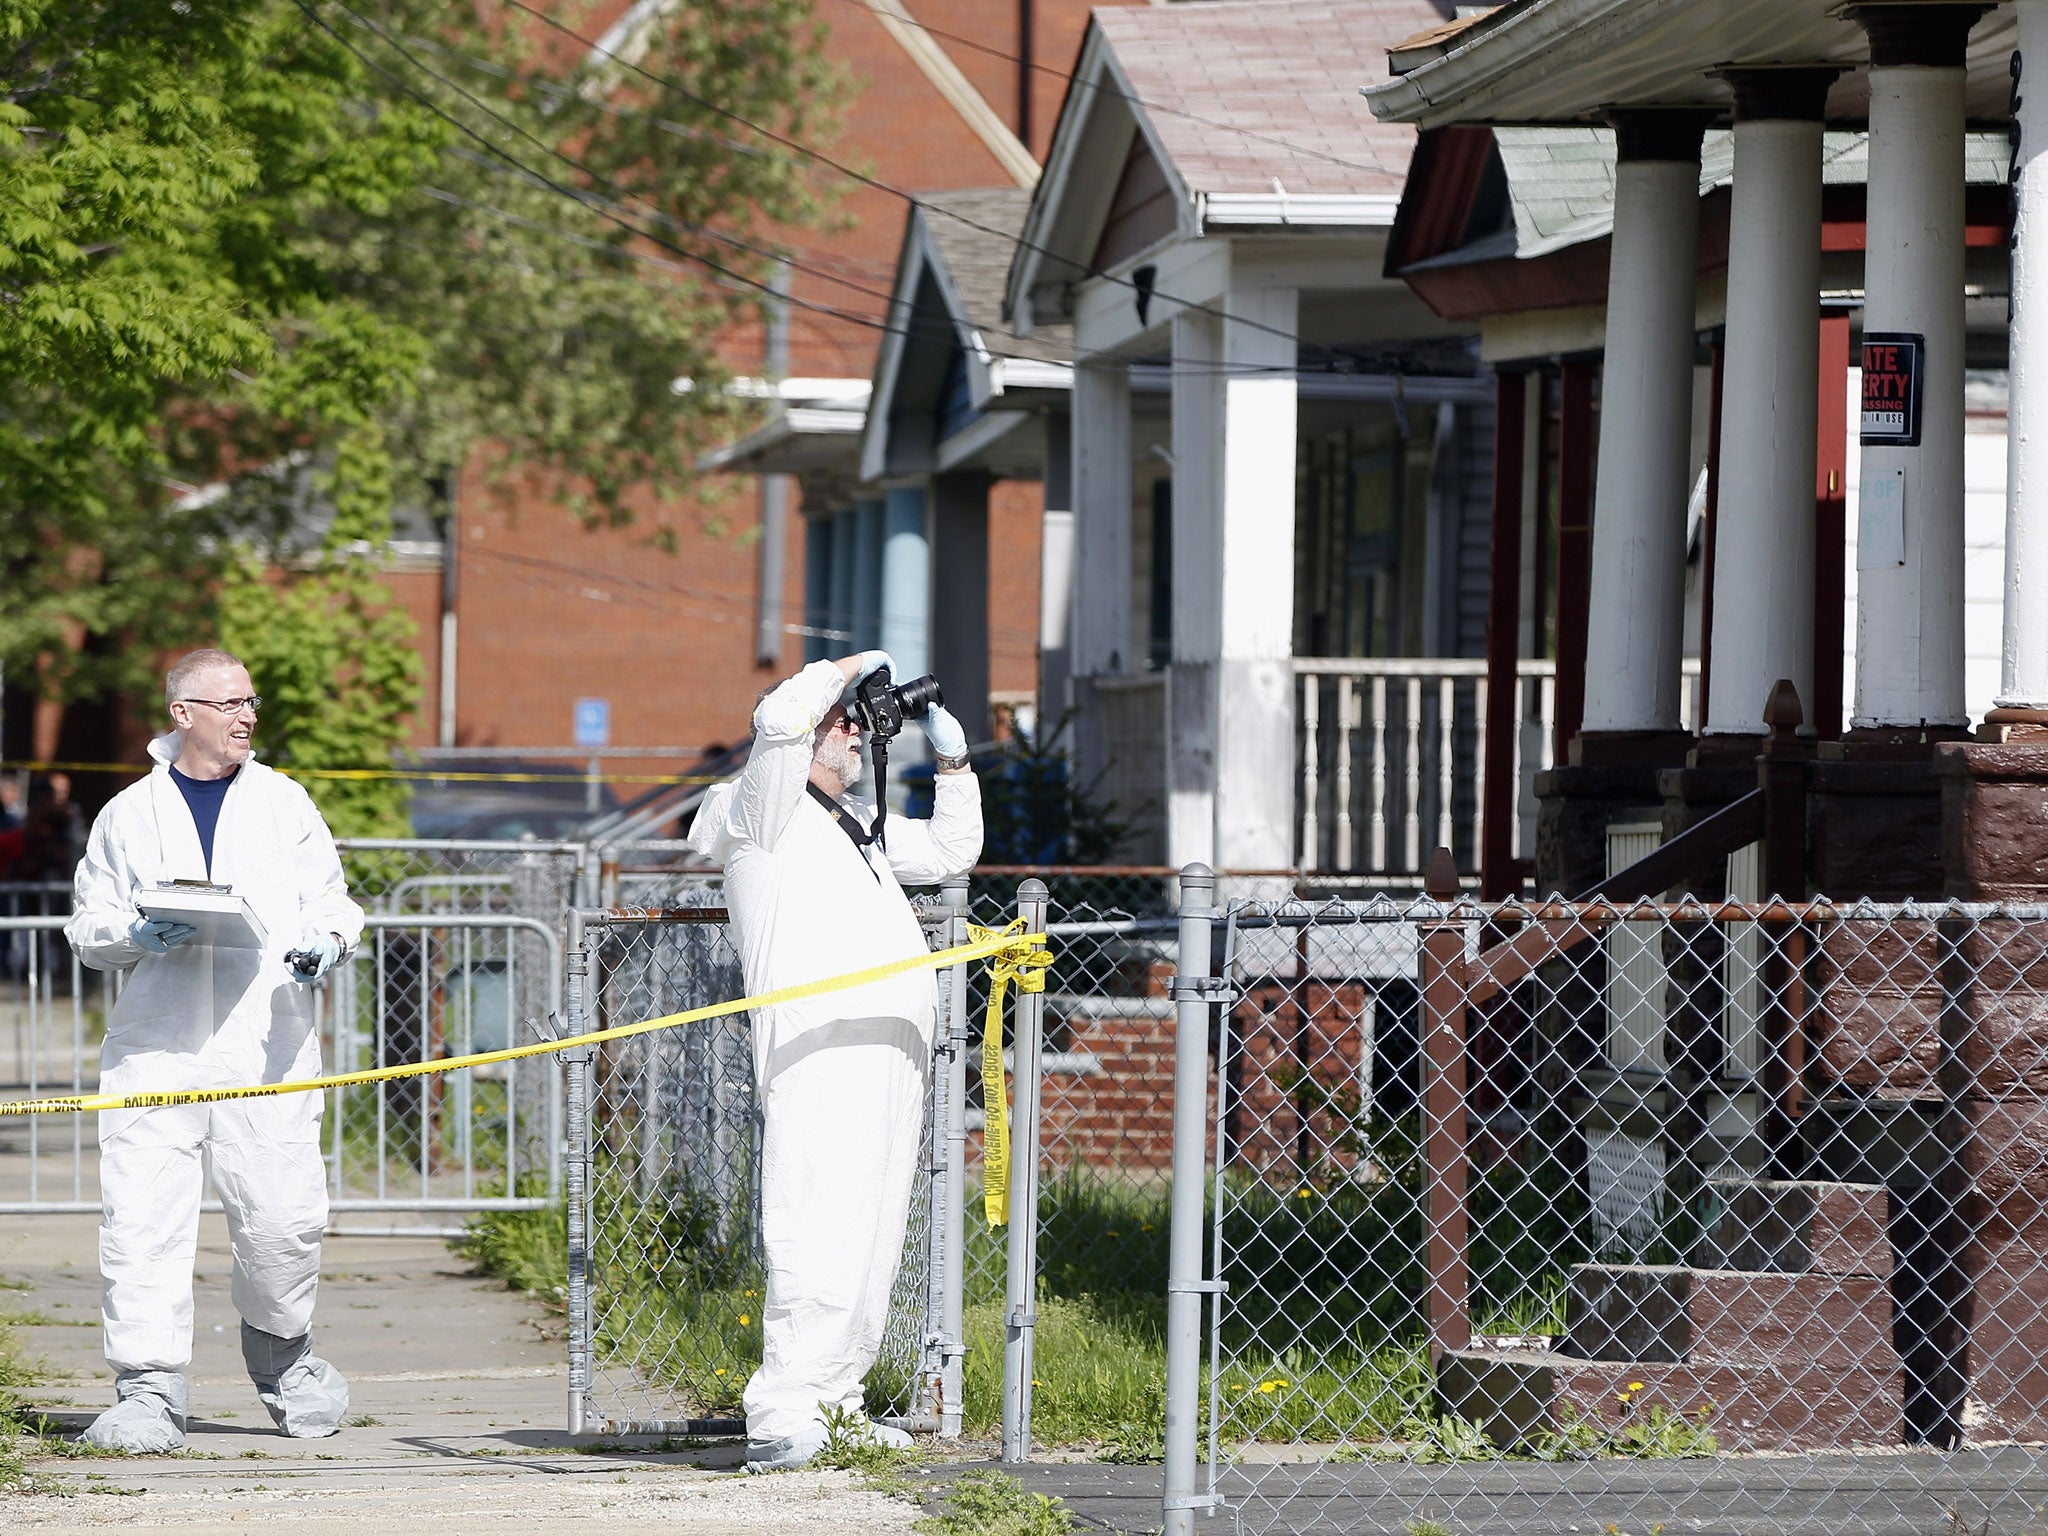 Police in protective suits investigate houses down the street from the house where three women were held captive for close to a decade May 8, 2013 in Cleveland, Ohio. Amanda Berry, Gina DeJesus, and Michelle Knight managed to escape their captors on May 6, 2013. Ariel Castro was charged with kidnap and rape. His brother Pedro and Onil Castro, were taken into custody but not charged.